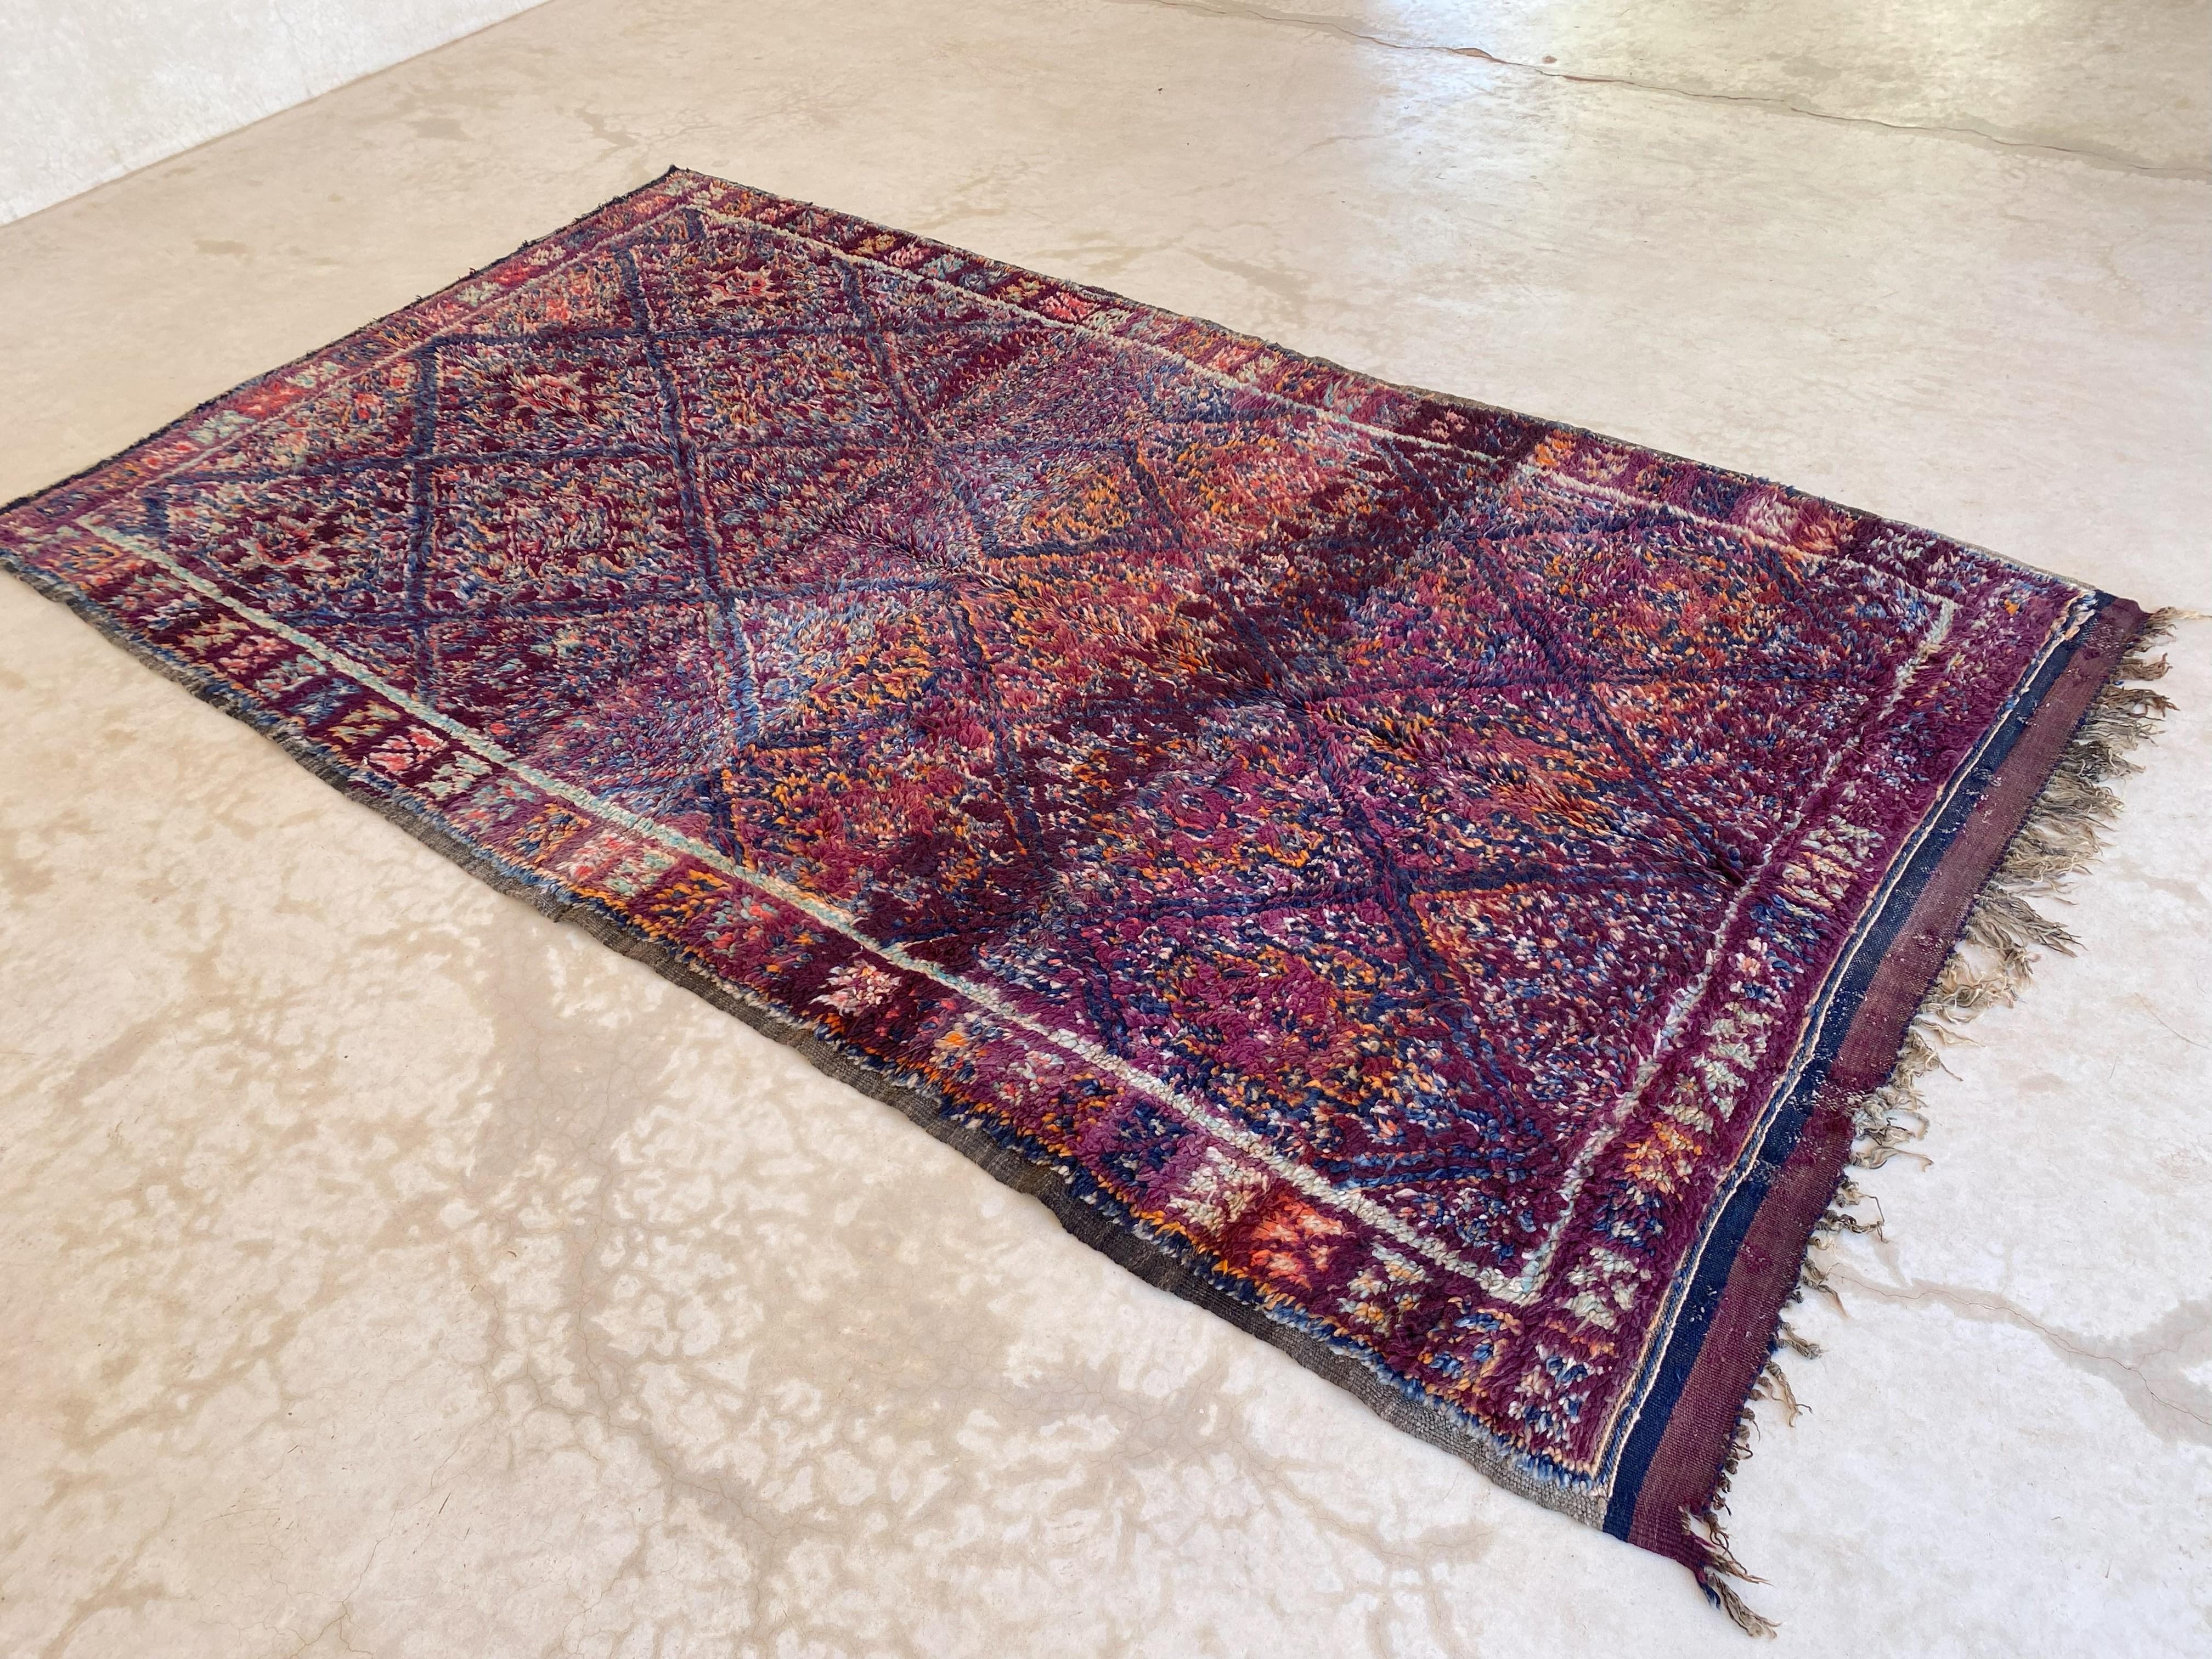 This vintage Beni Mguild rug is gorgeous! It is the perfect bohemian rug to bring warmth and character to your space!

The background color of this rug is of several purple shades. The composition of the rug is a classic multiplied diamond pattern